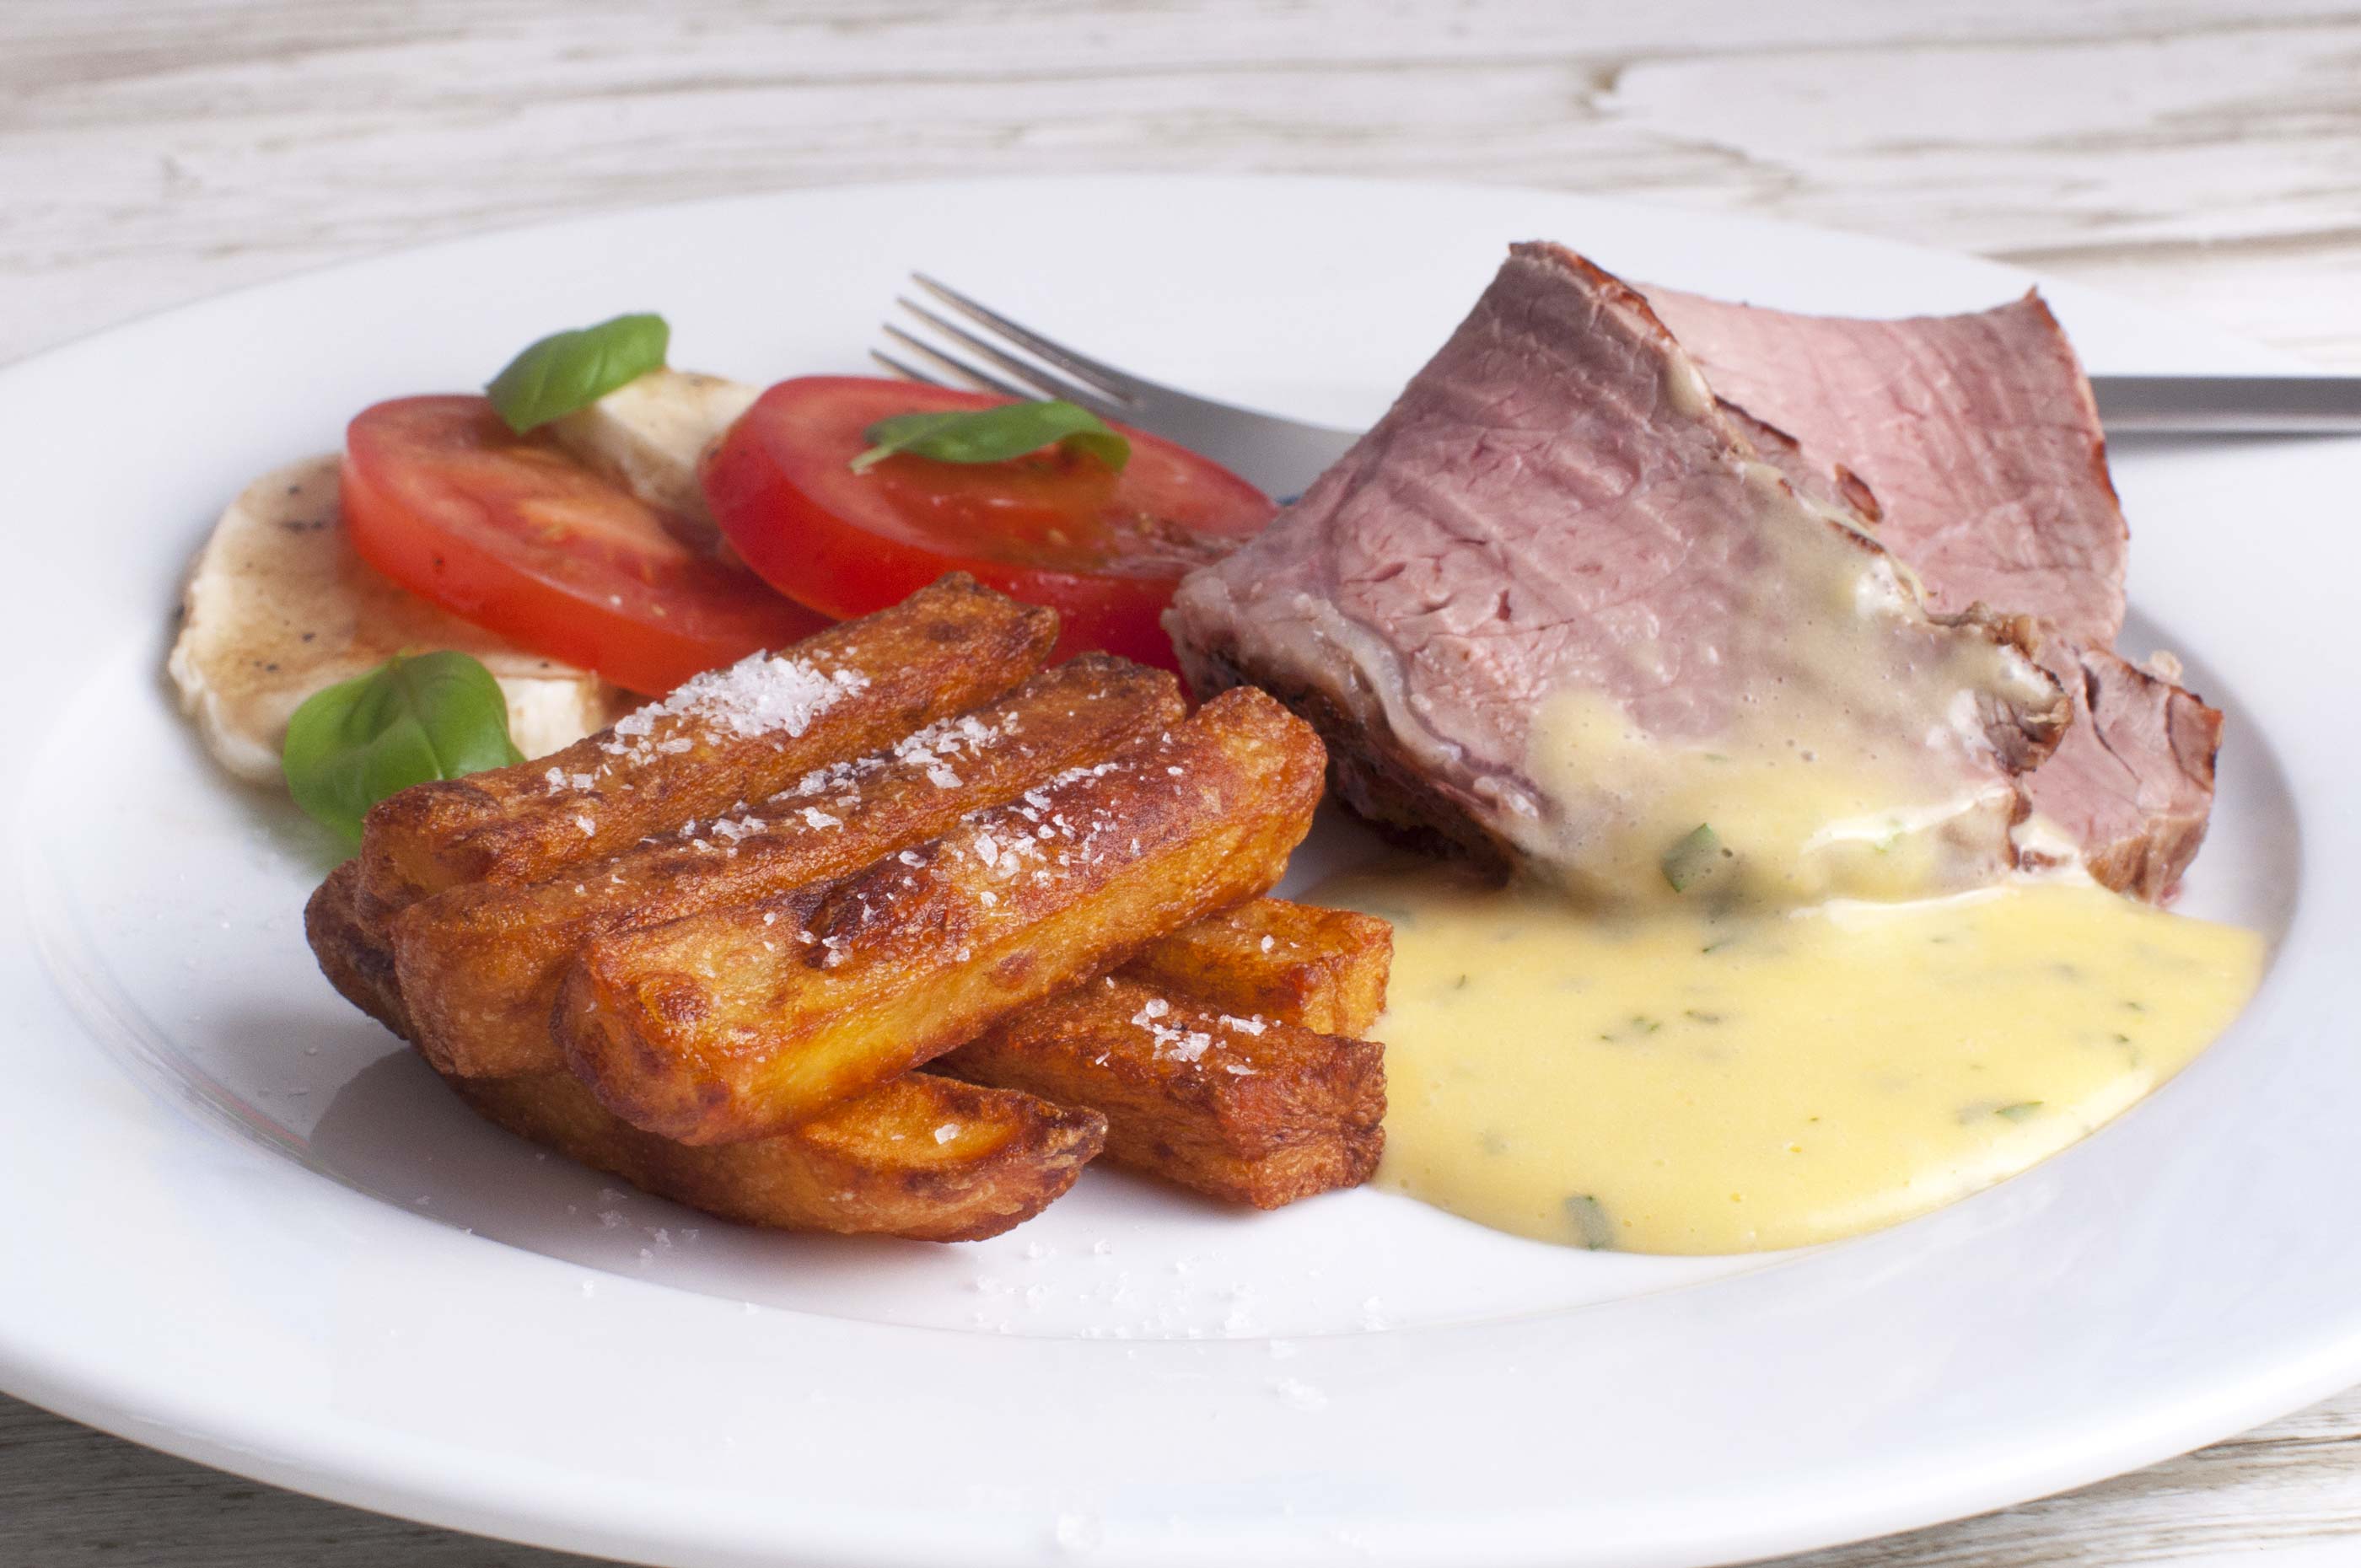 Veal culotte with homemade chips, bearnaise and tomato salad